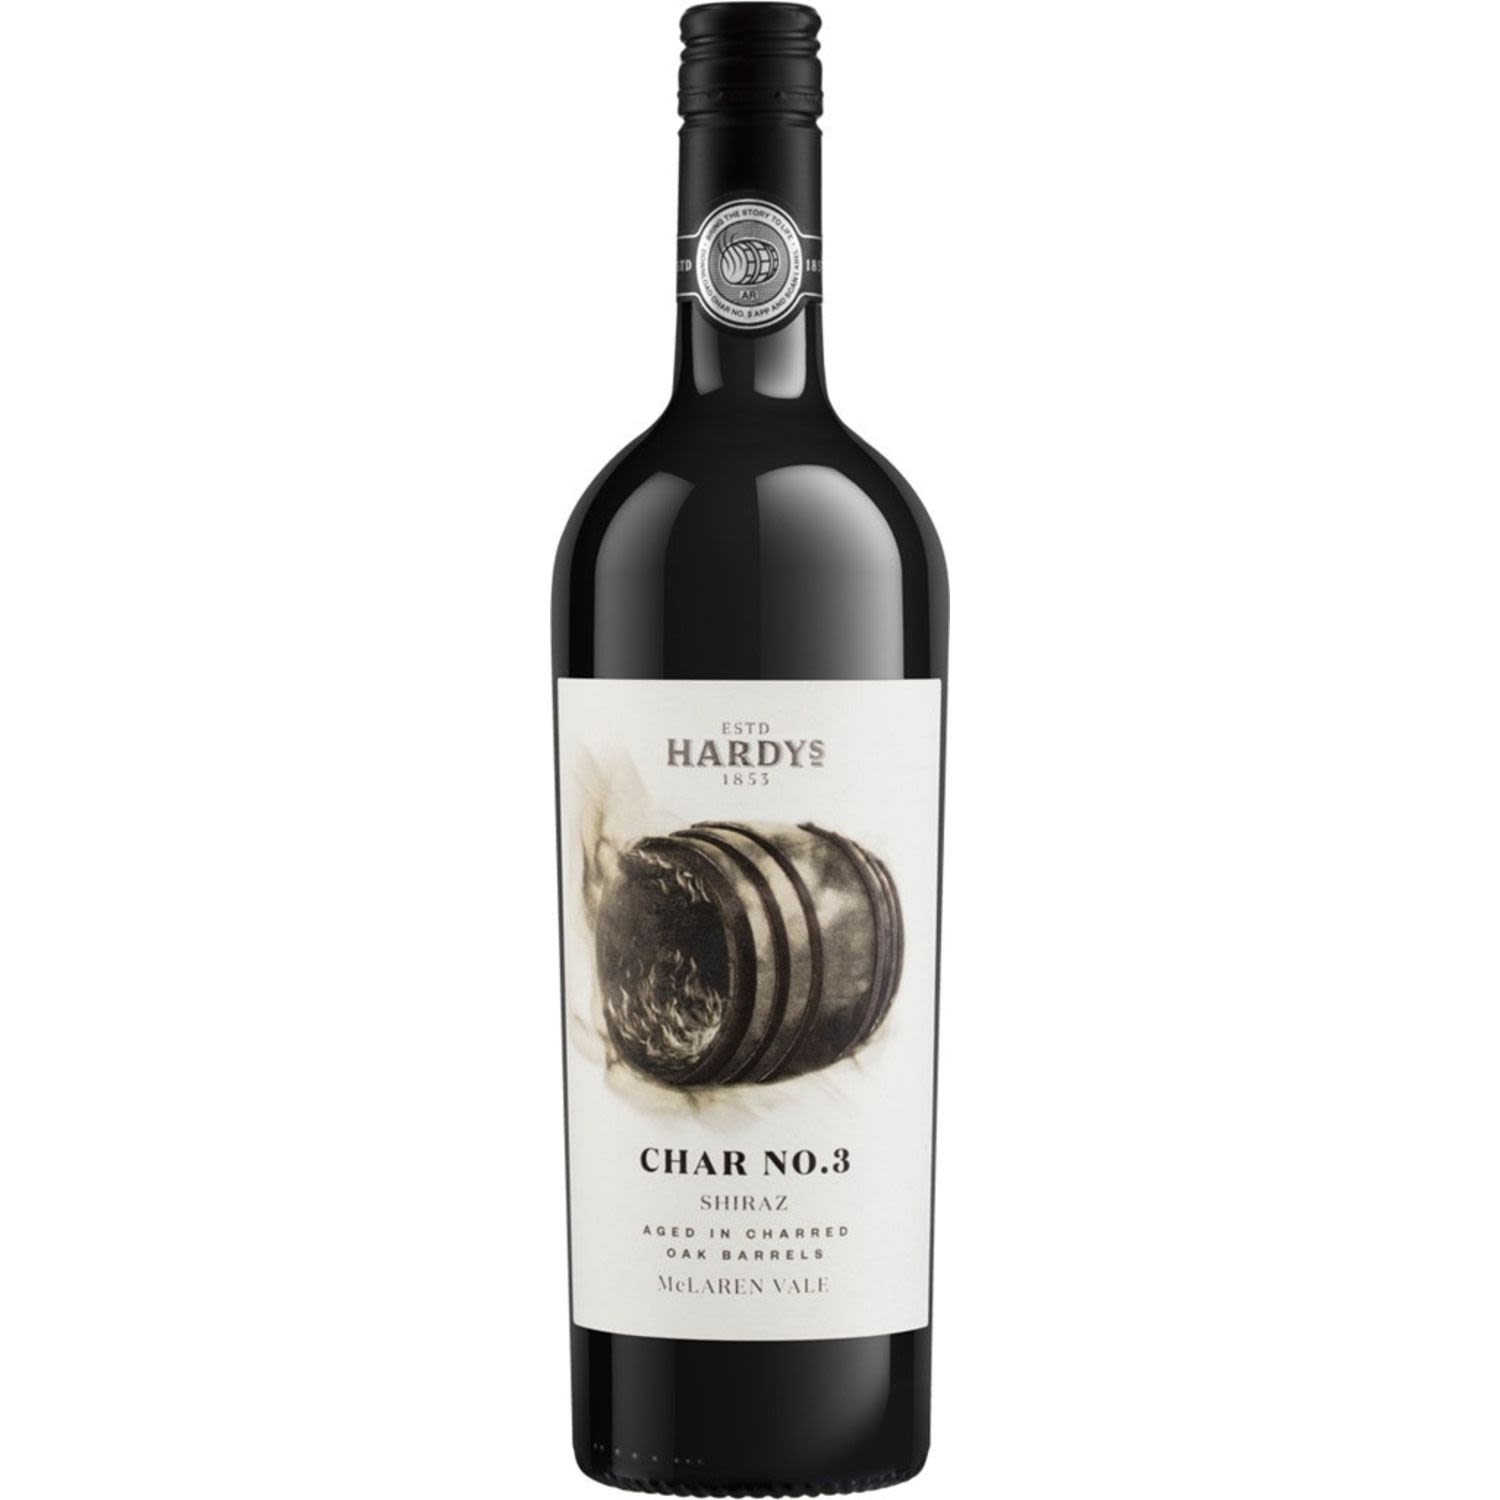 Sourced from a variety of McLaren Vale vineyards, including Upper Tintara, Blewitt Springs, Maslins Beach, Sellicks foothills and McLaren Flat. CHAR NO.3 Shiraz is bursting with bright and fresh dark berry fruit, it has great depth of flavour and a long and smooth finish.<br /> <br />Alcohol Volume: 14.50%<br /><br />Pack Format: Bottle<br /><br />Standard Drinks: 8.6</br /><br />Pack Type: Bottle<br /><br />Country of Origin: Australia<br /><br />Region: McLaren Vale<br /><br />Vintage: Vintages Vary<br />